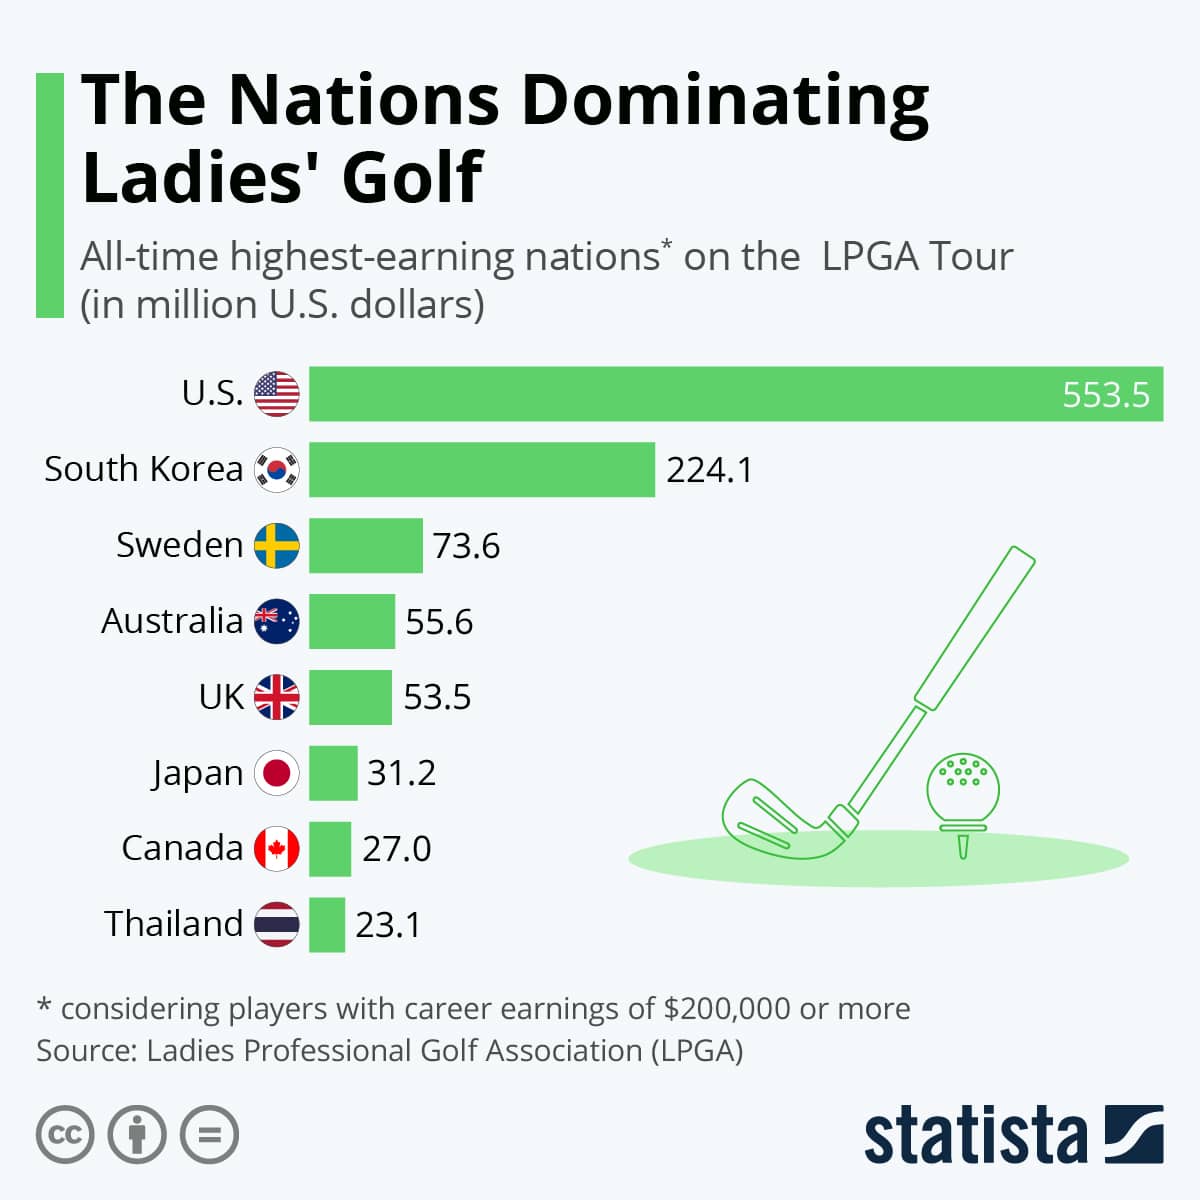 The Nations Dominating Ladies' Golf